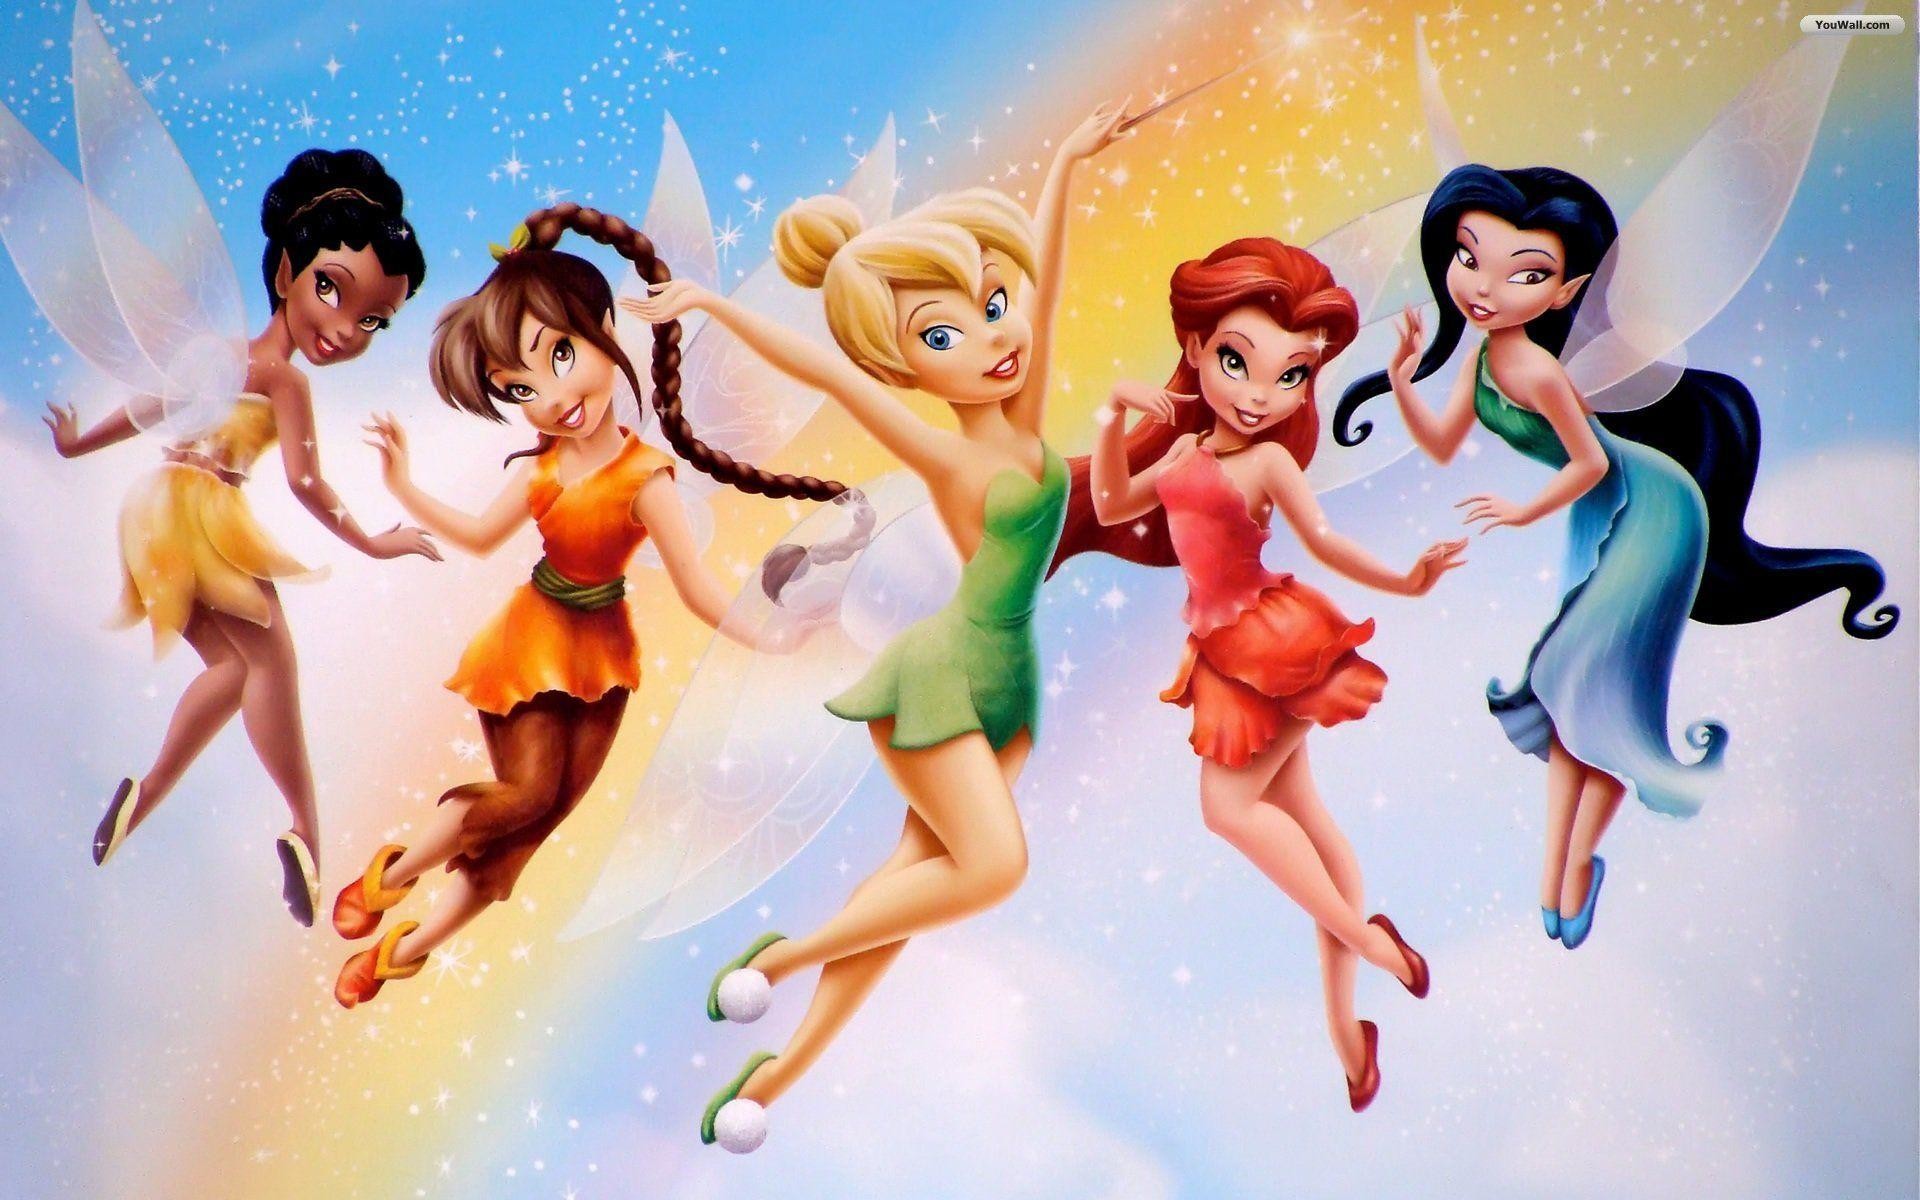 Tinker Bell Wallpaper For Android Cartoons Images